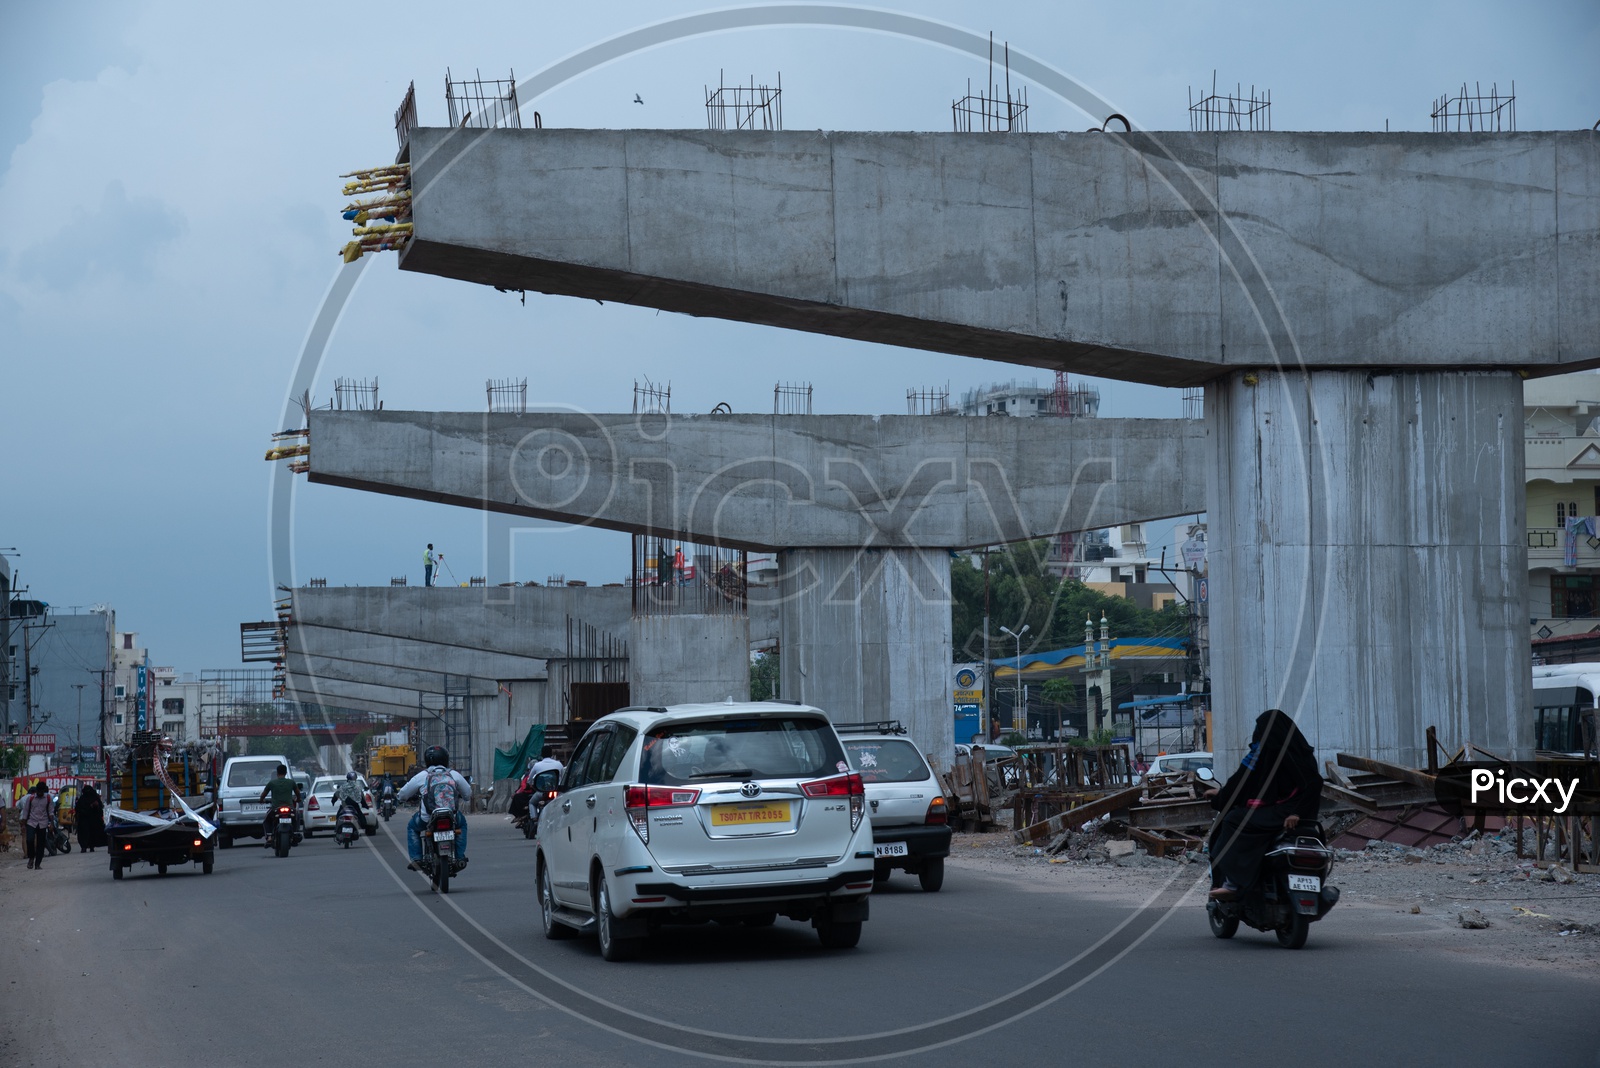 Under Construction Flyovers  With Pillars on The Roads of  Cities With Commuting Vehicles  On the Roads